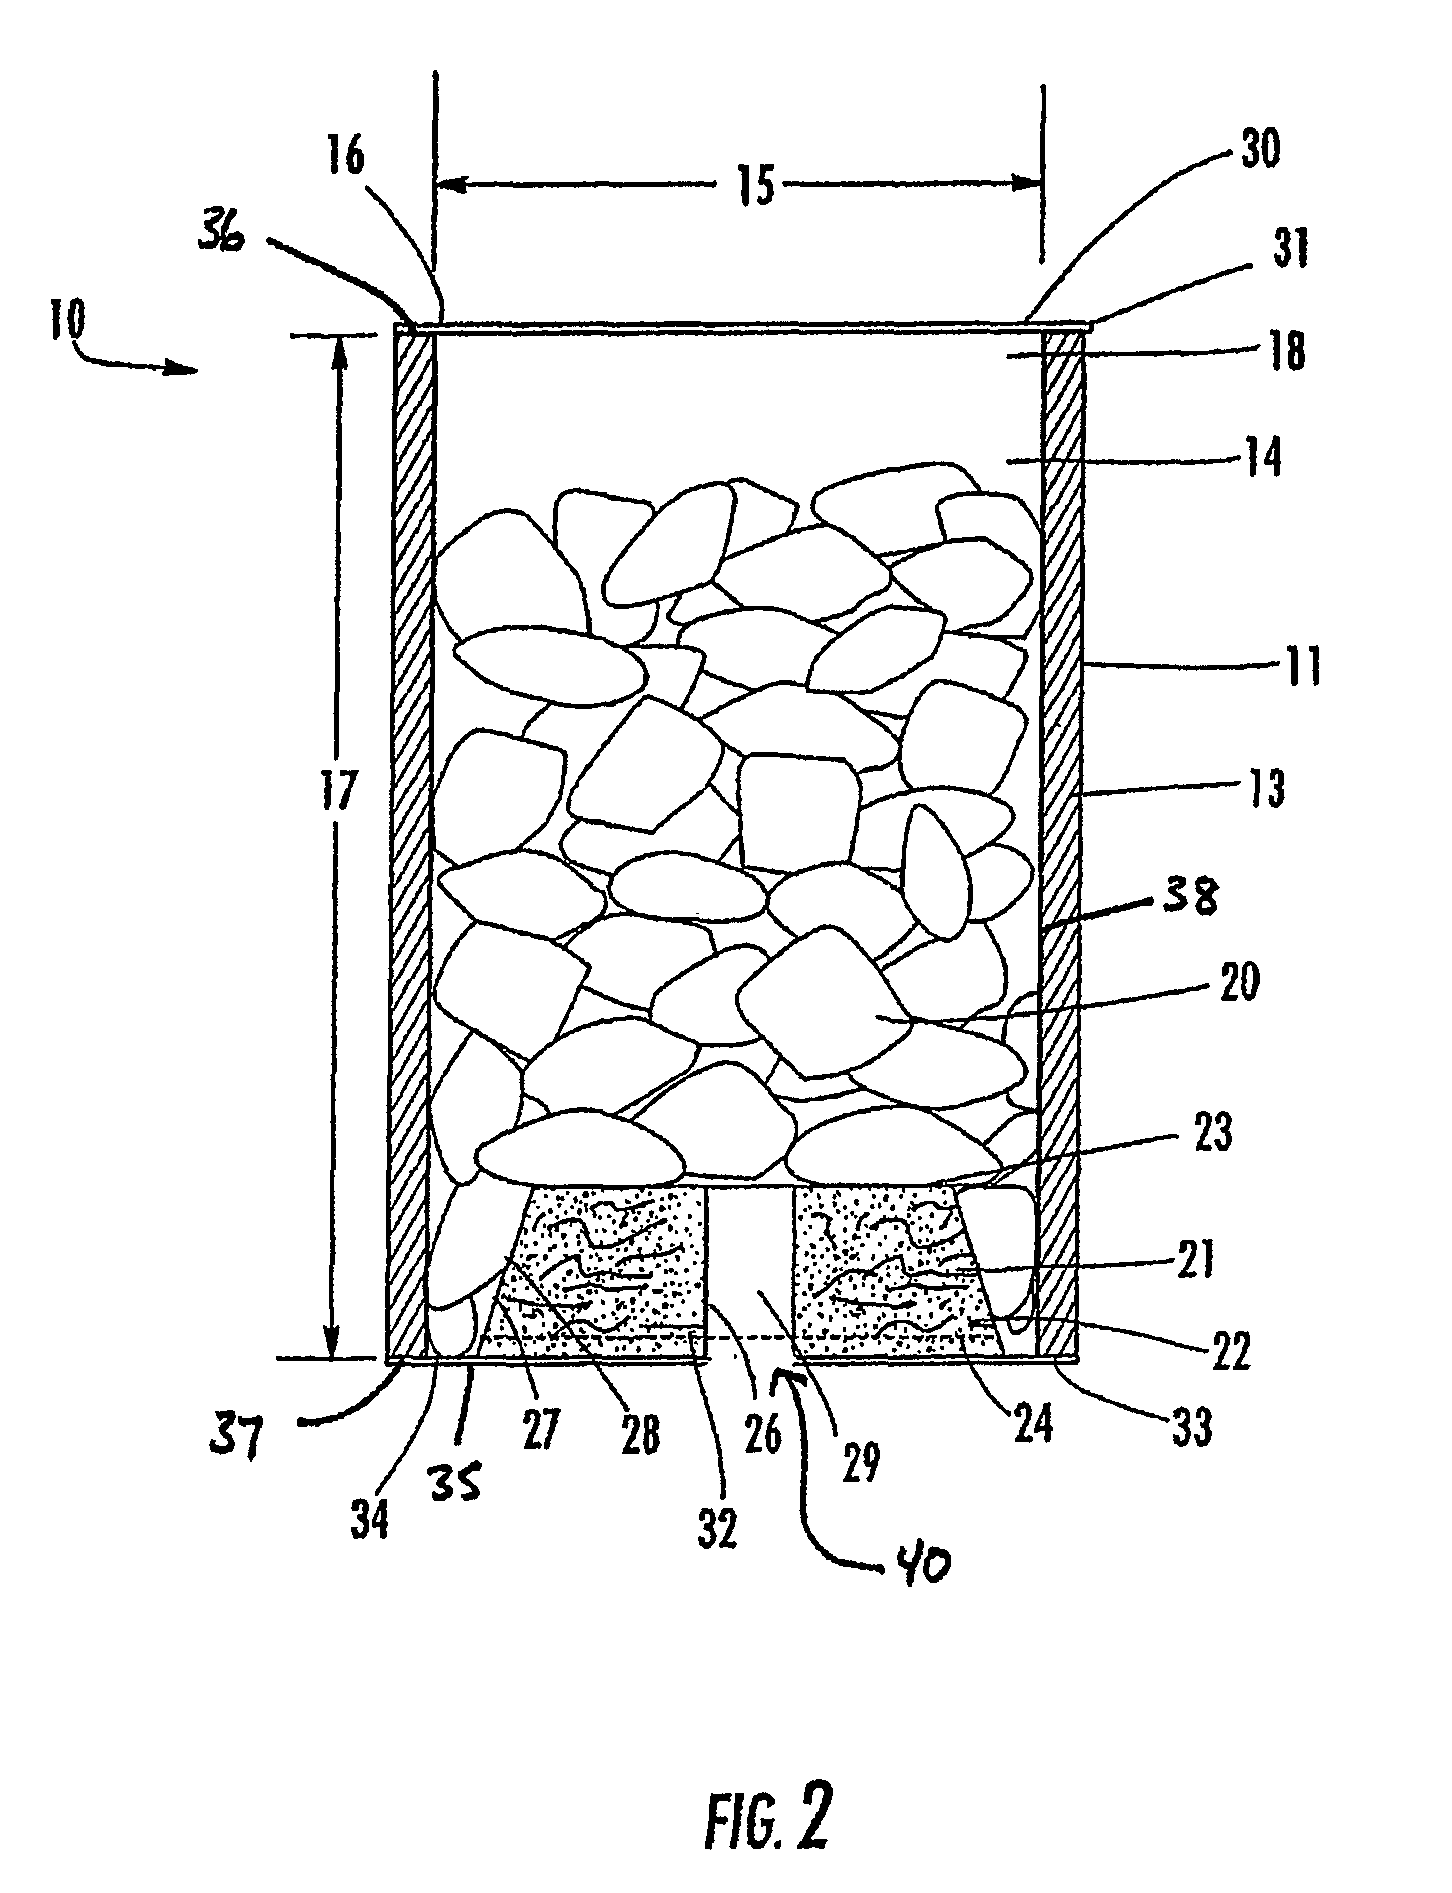 Combustible packages for containing a fuel source and a fire starter